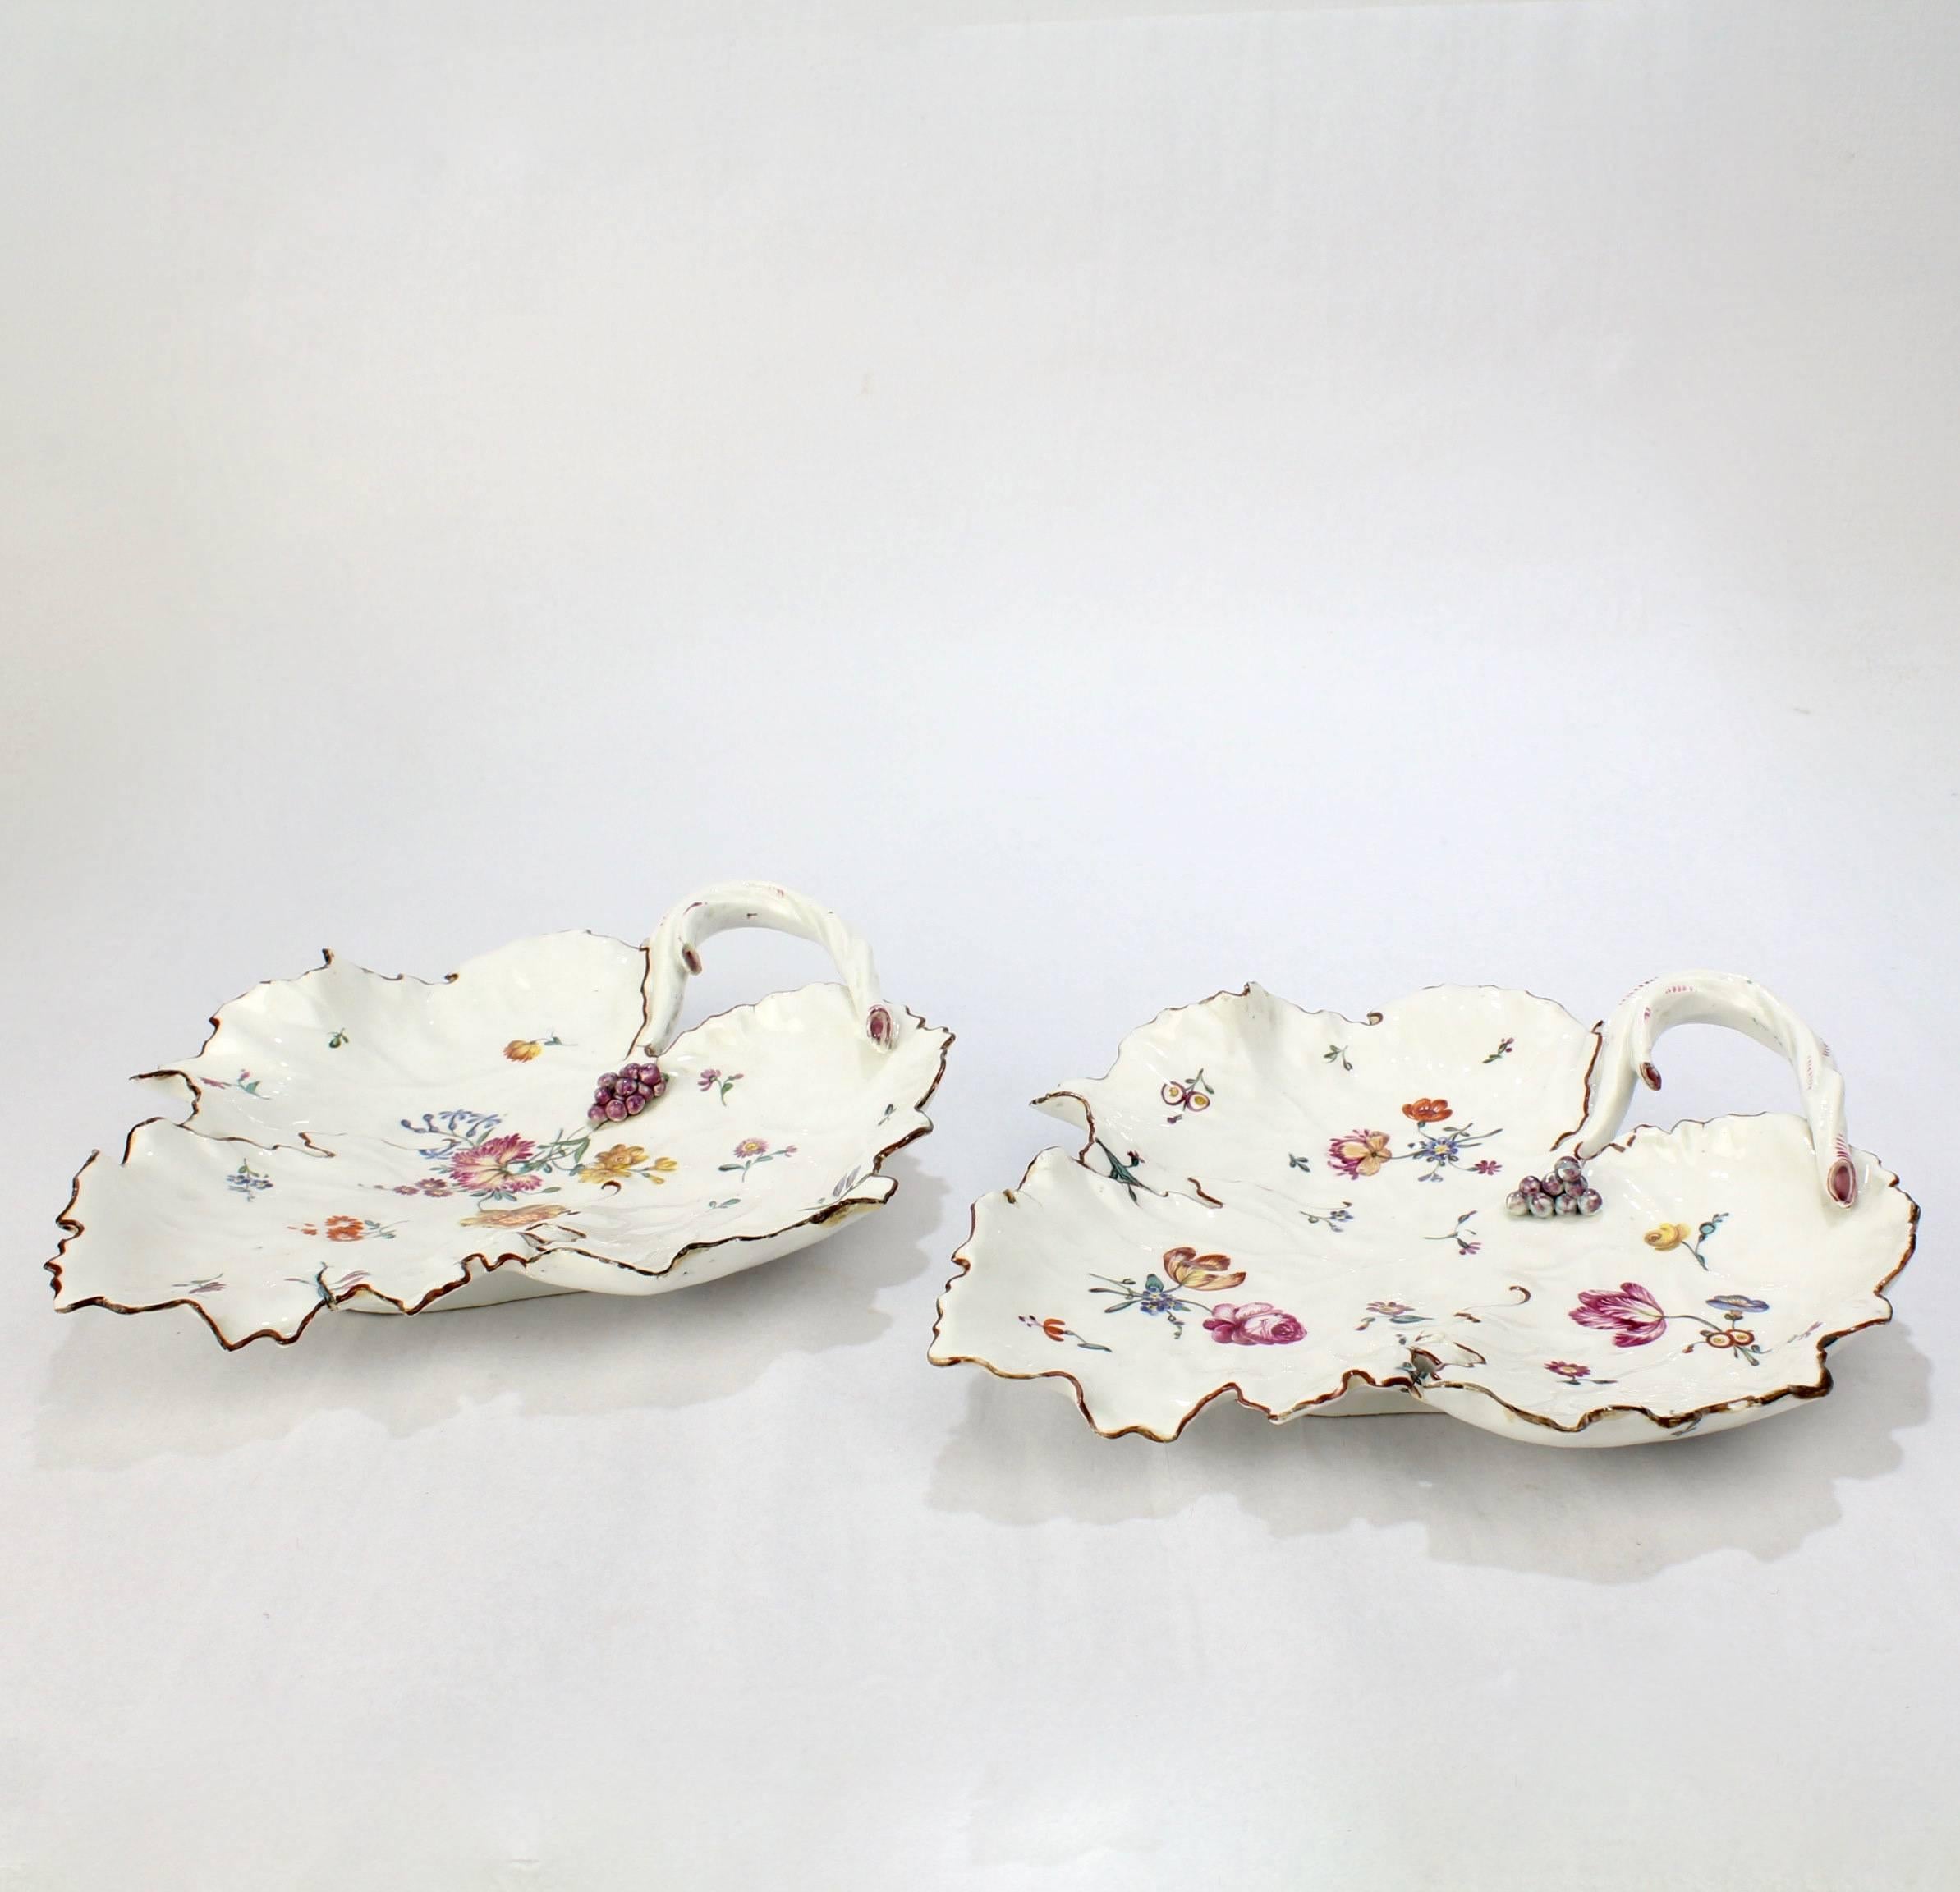 A fine rare pair of mid-18th century Frankenthal leaf dishes.

Having figural applied grapes near the handle and enamel decorated flowers throughout.

Condition: There are some chips and fritting to the edges, firing cracks both concealed with